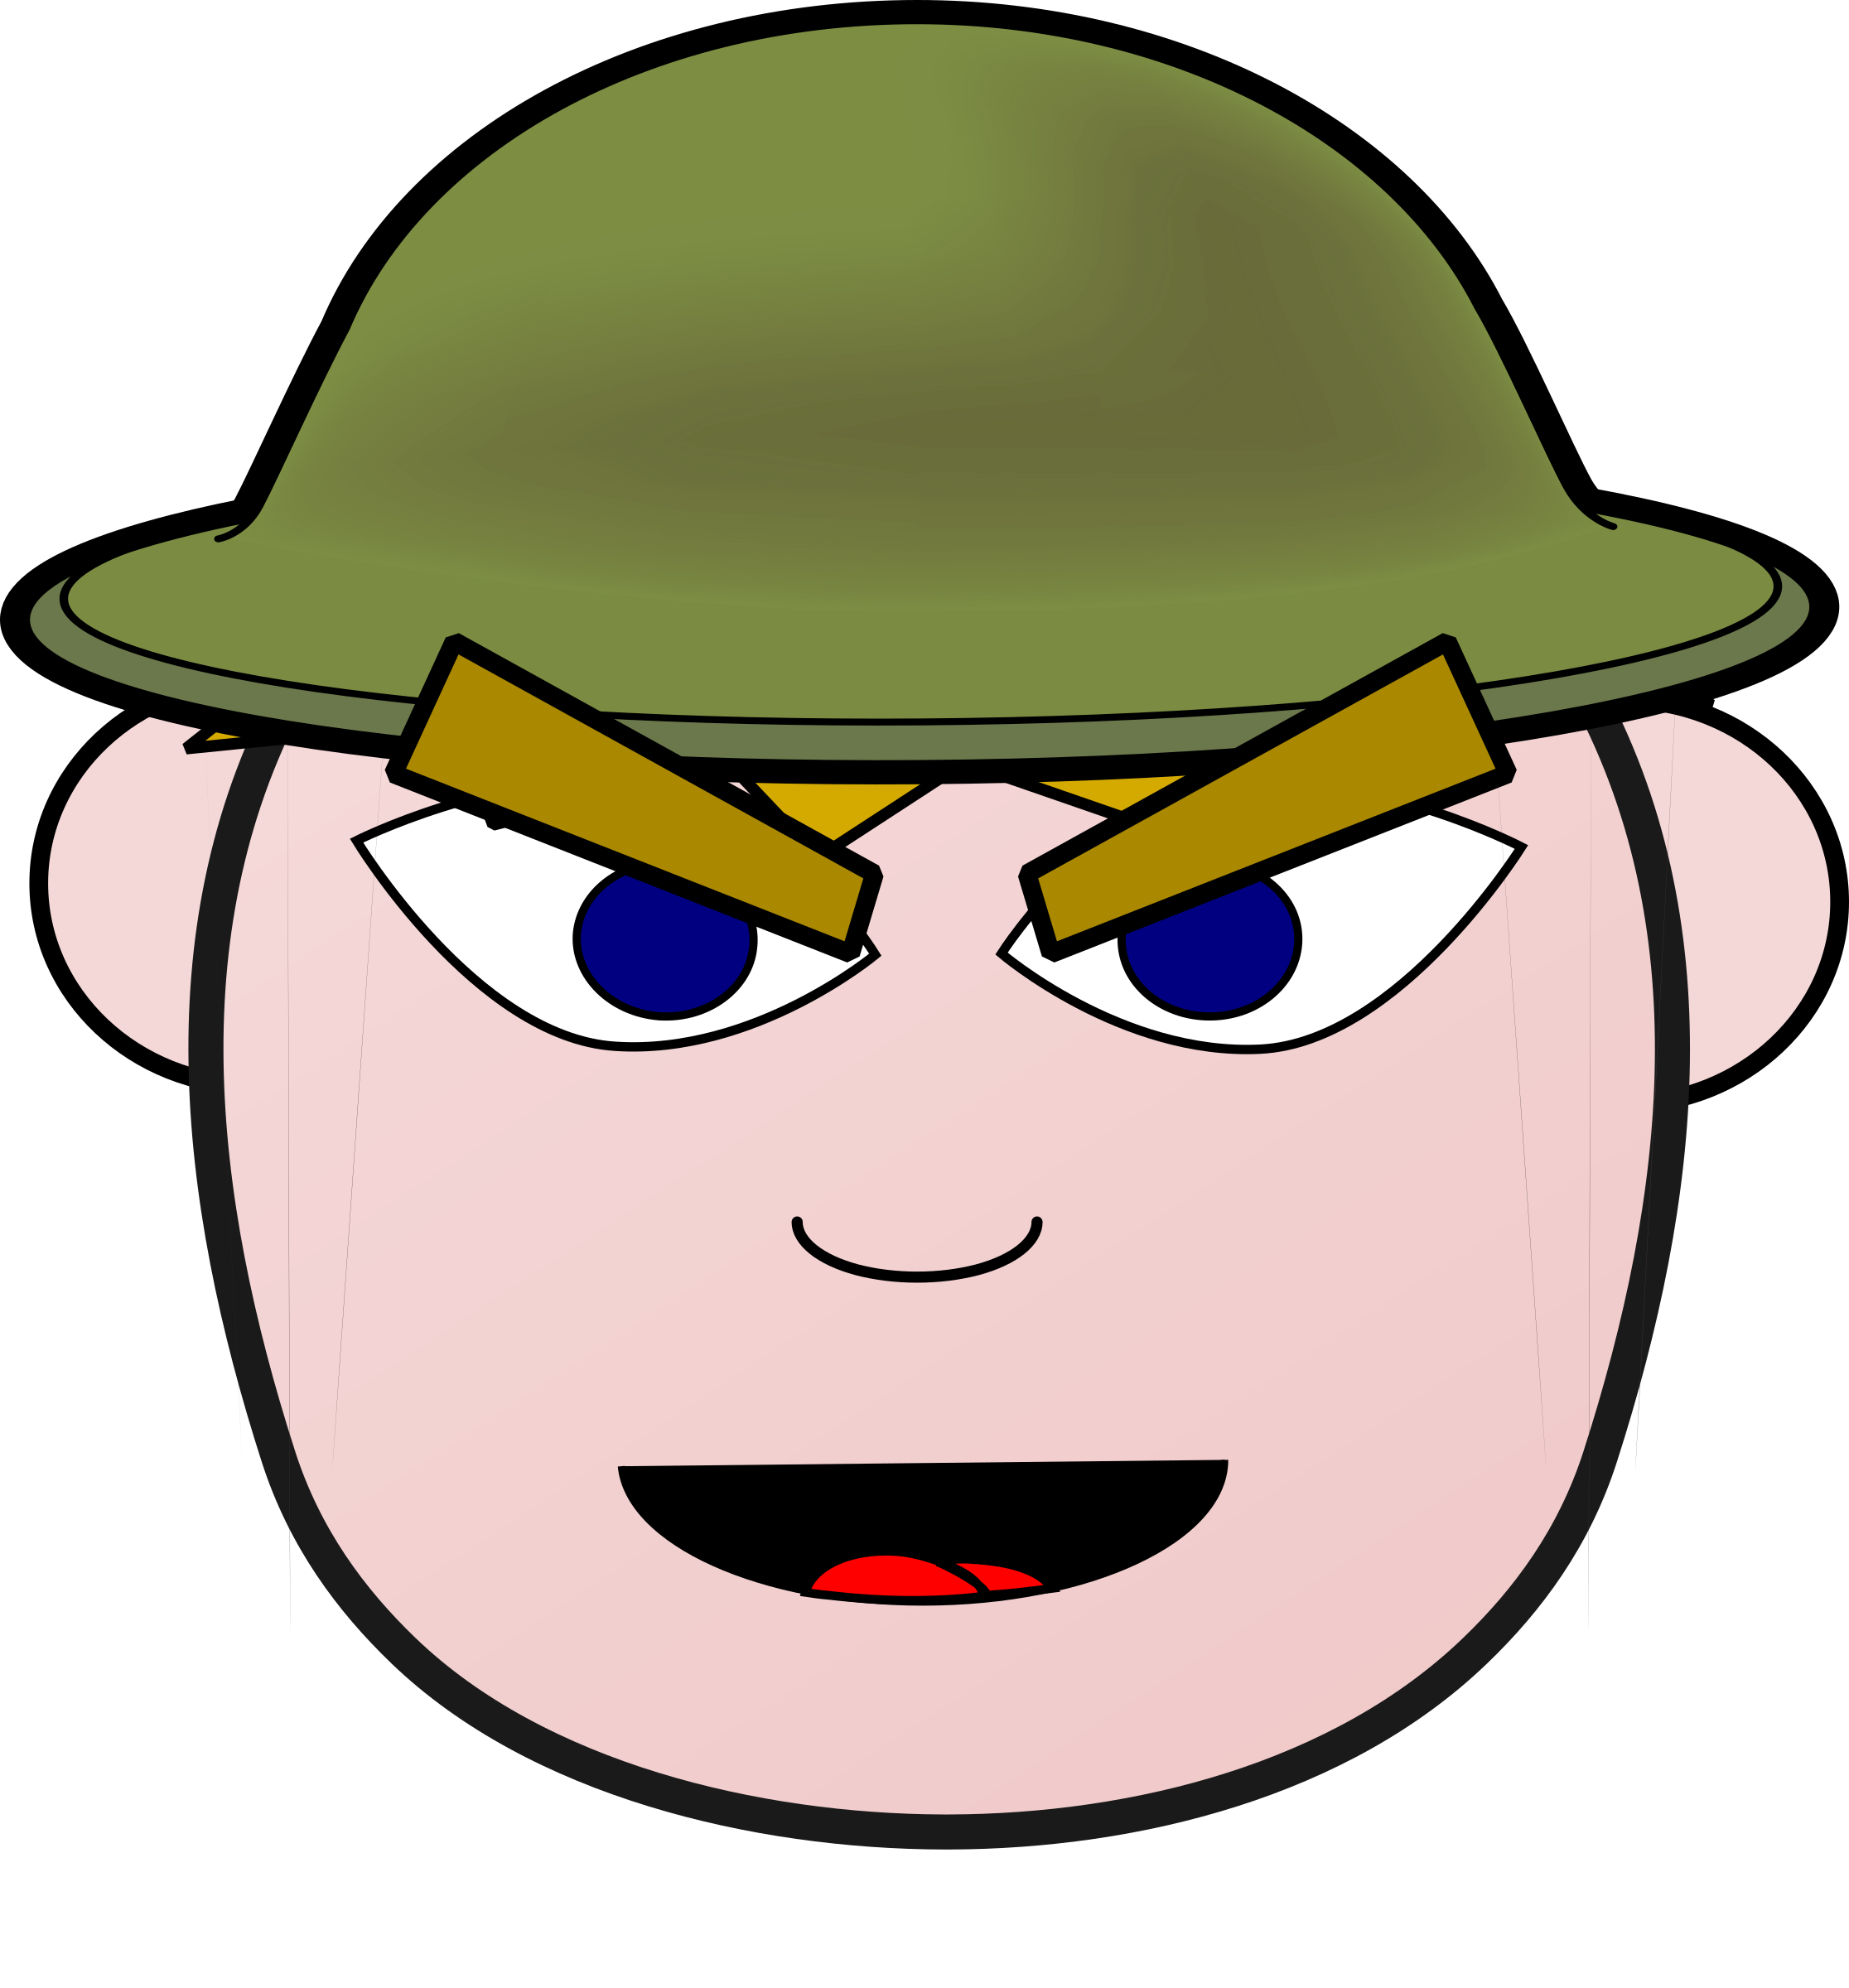 happy clipart soldier